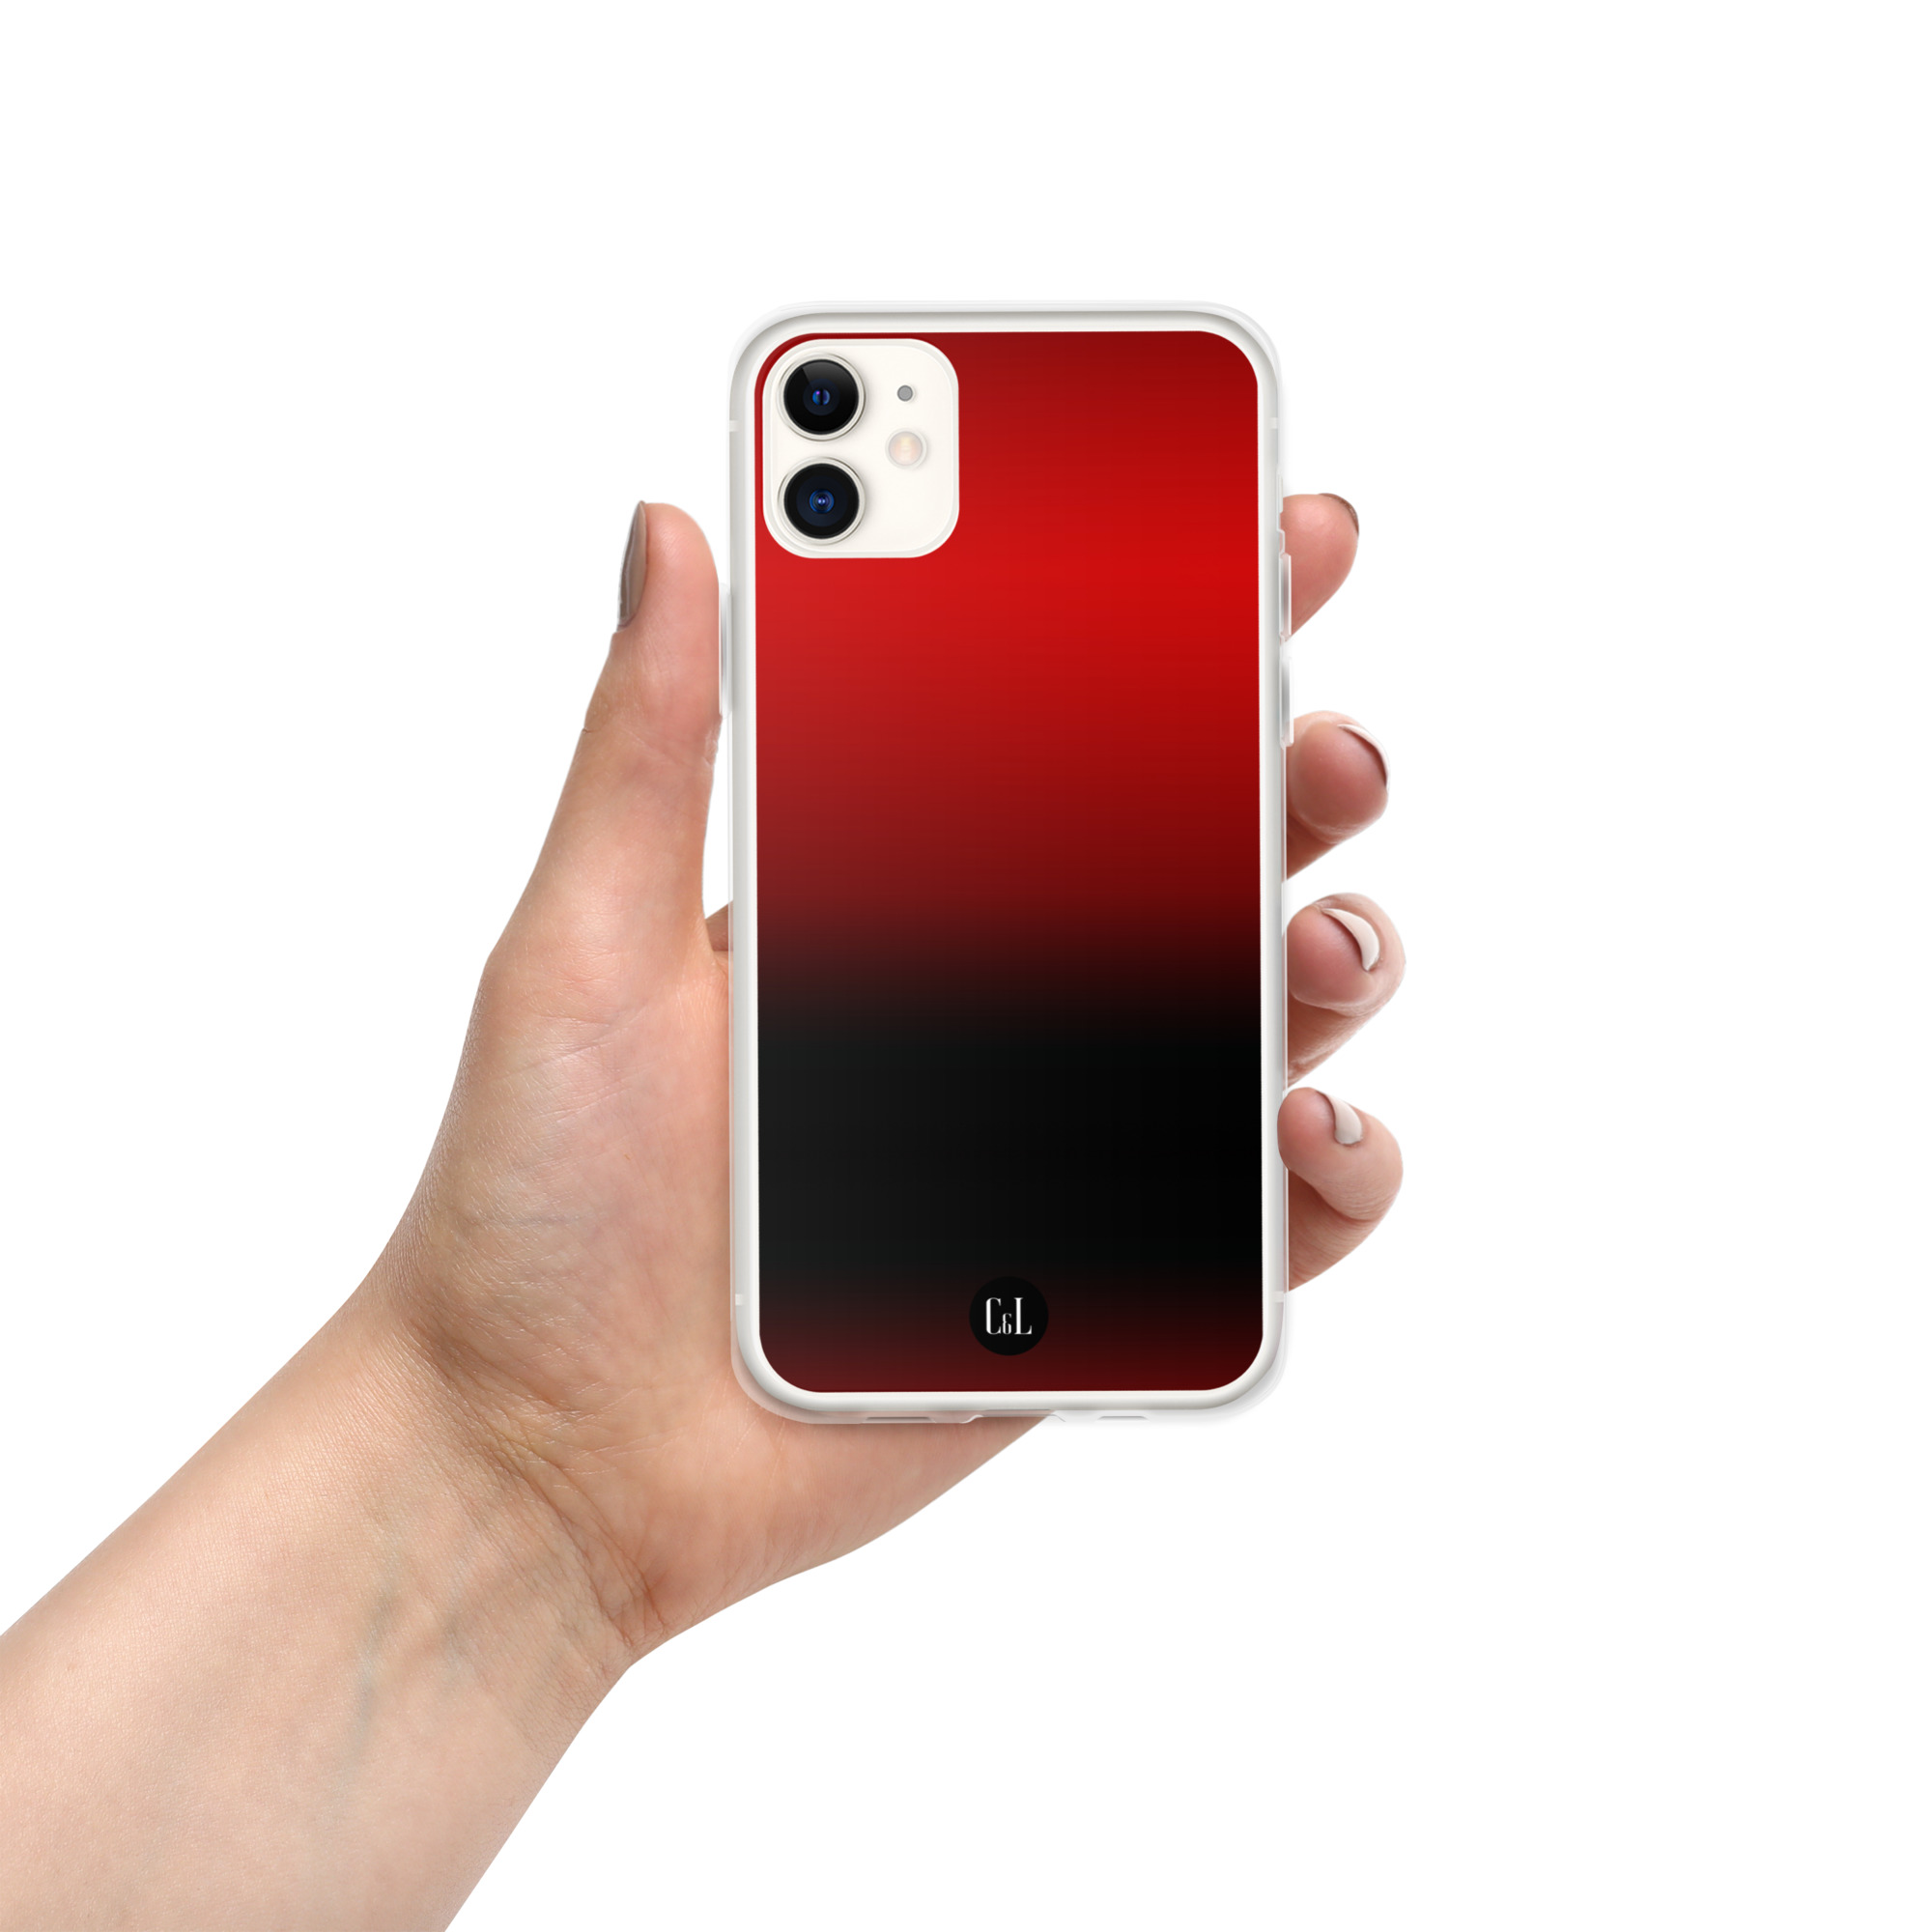 clear-case-for-iphone-iphone-11-case-on-phone-6482dcd191dec.jpg